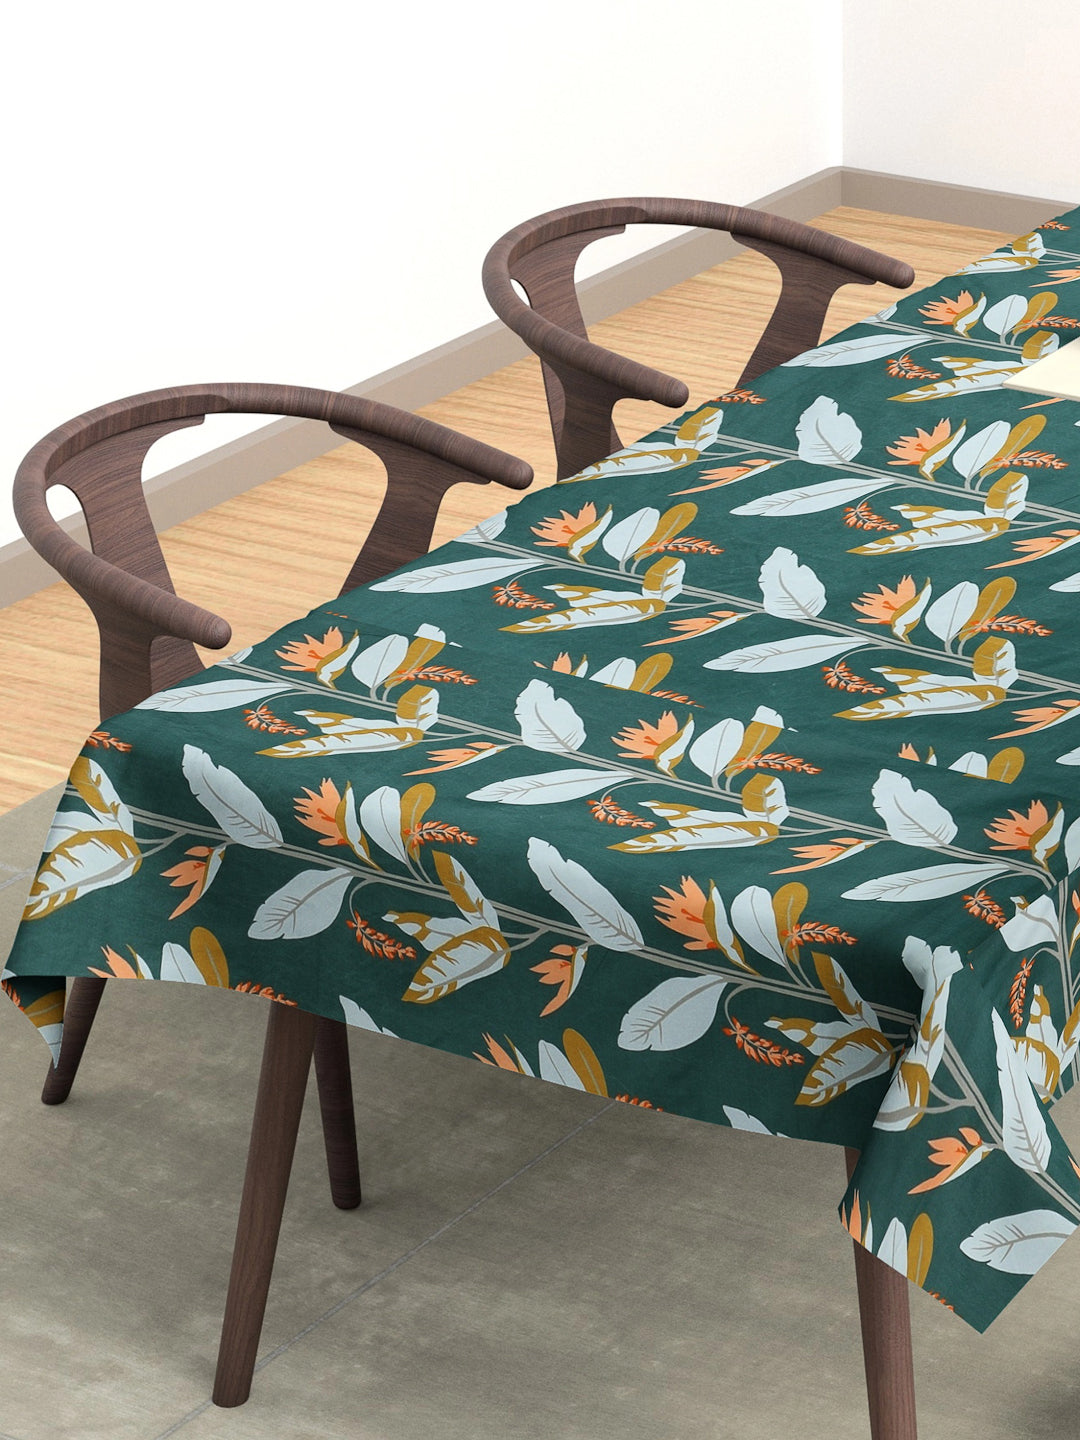 Arrabi Green Leaf Cotton Blend 8 SEATER Table Cover (215 x 150 cm)